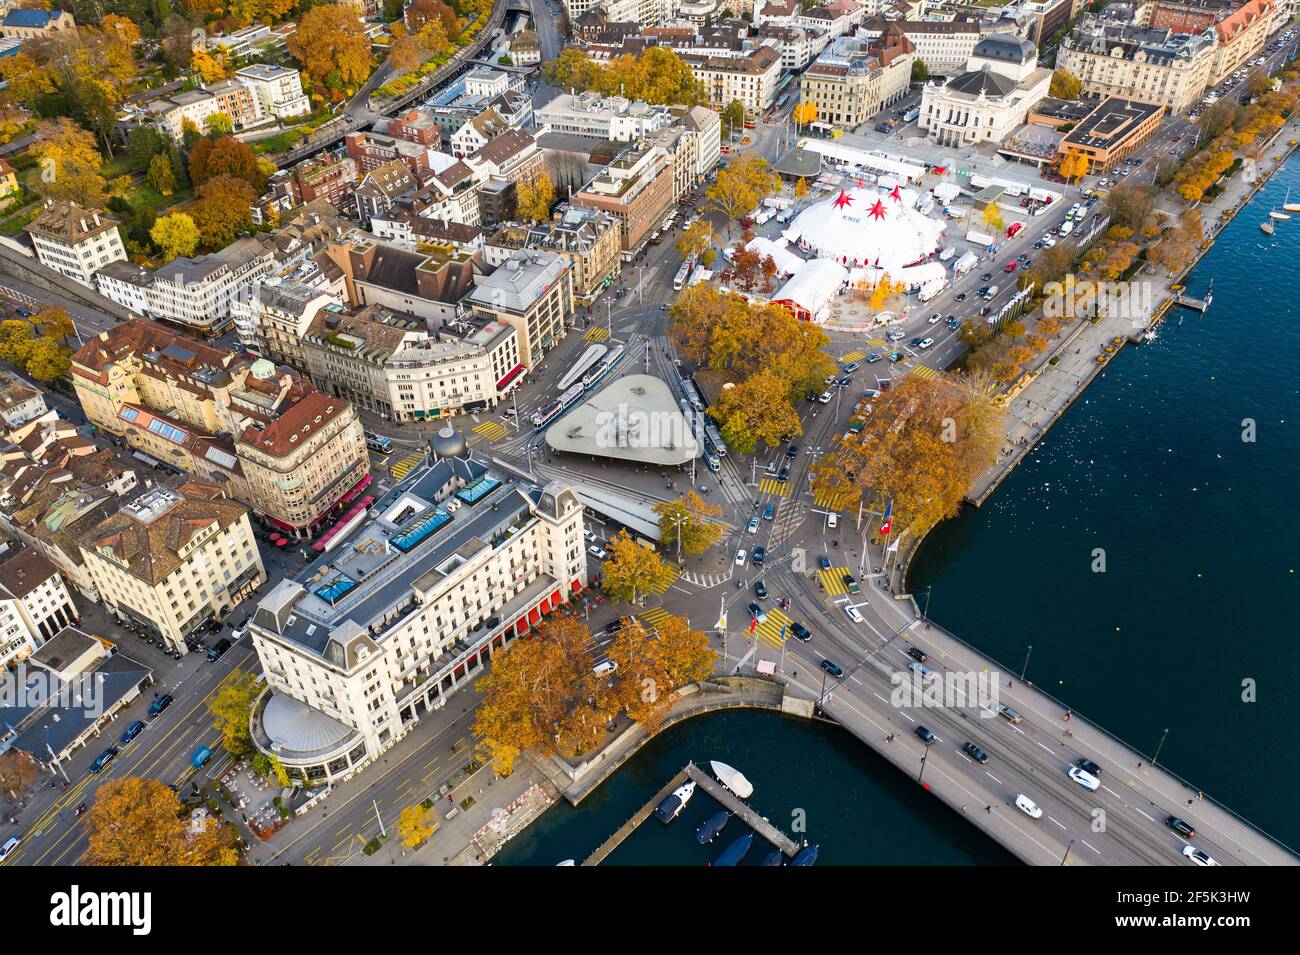 Zurich, Switzerland - October 27 2020: Aerial view of the Knie circus tent that lies on the Utoquai along lake Zurich in the largest city in Switzerla Stock Photo